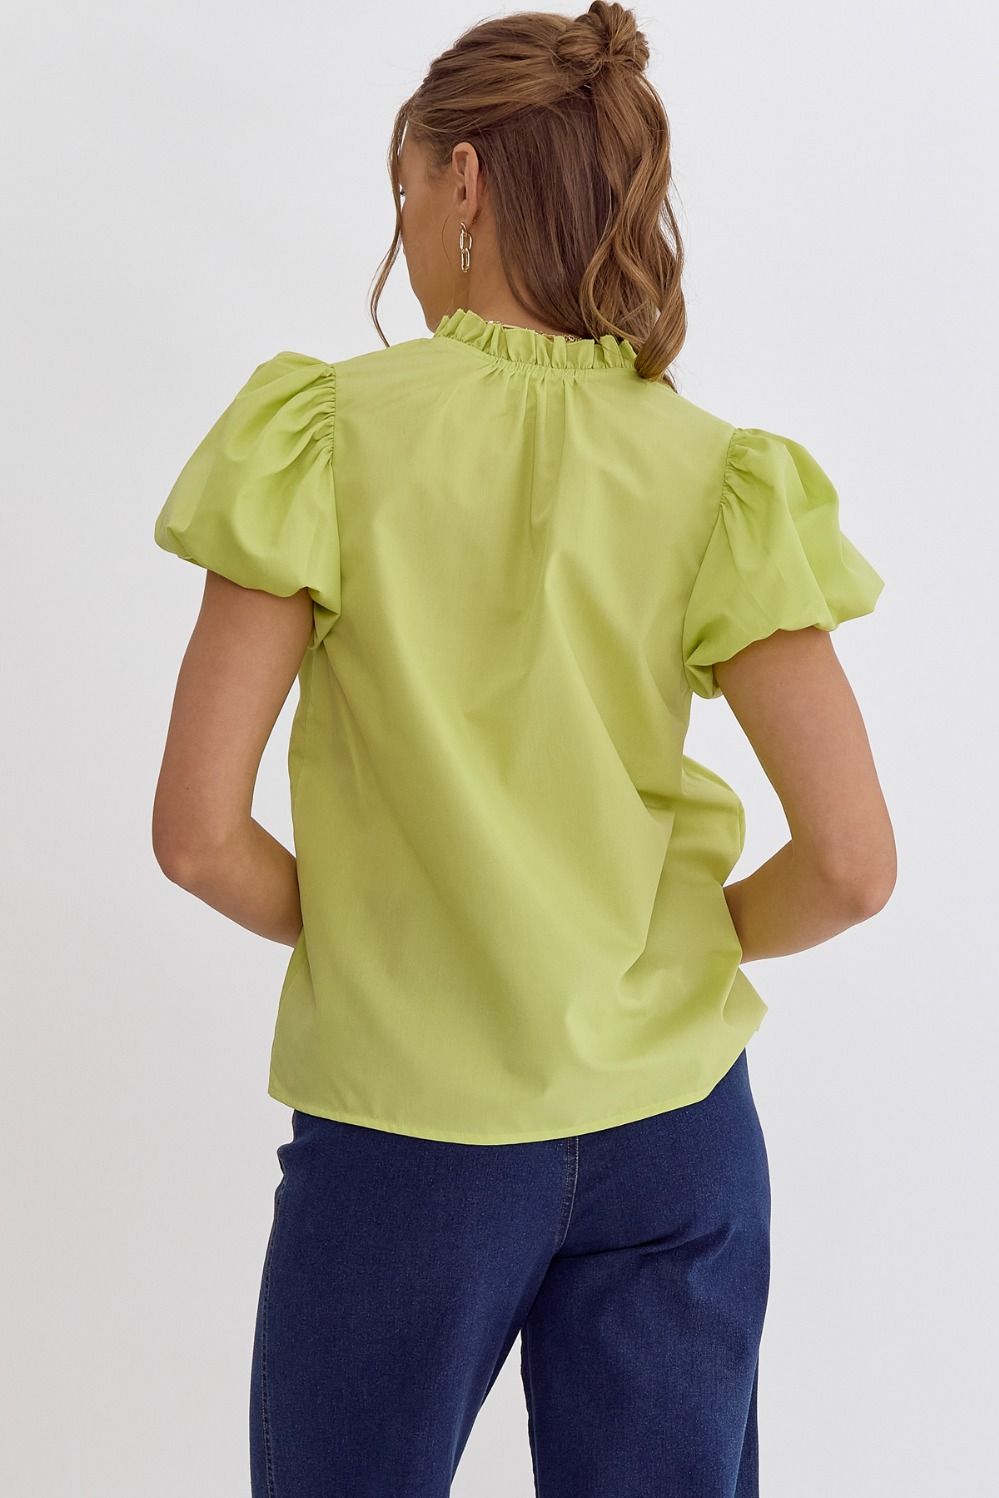 Entro | Lime Green V-Neck Top | Sweetest Stitch Online Boutique